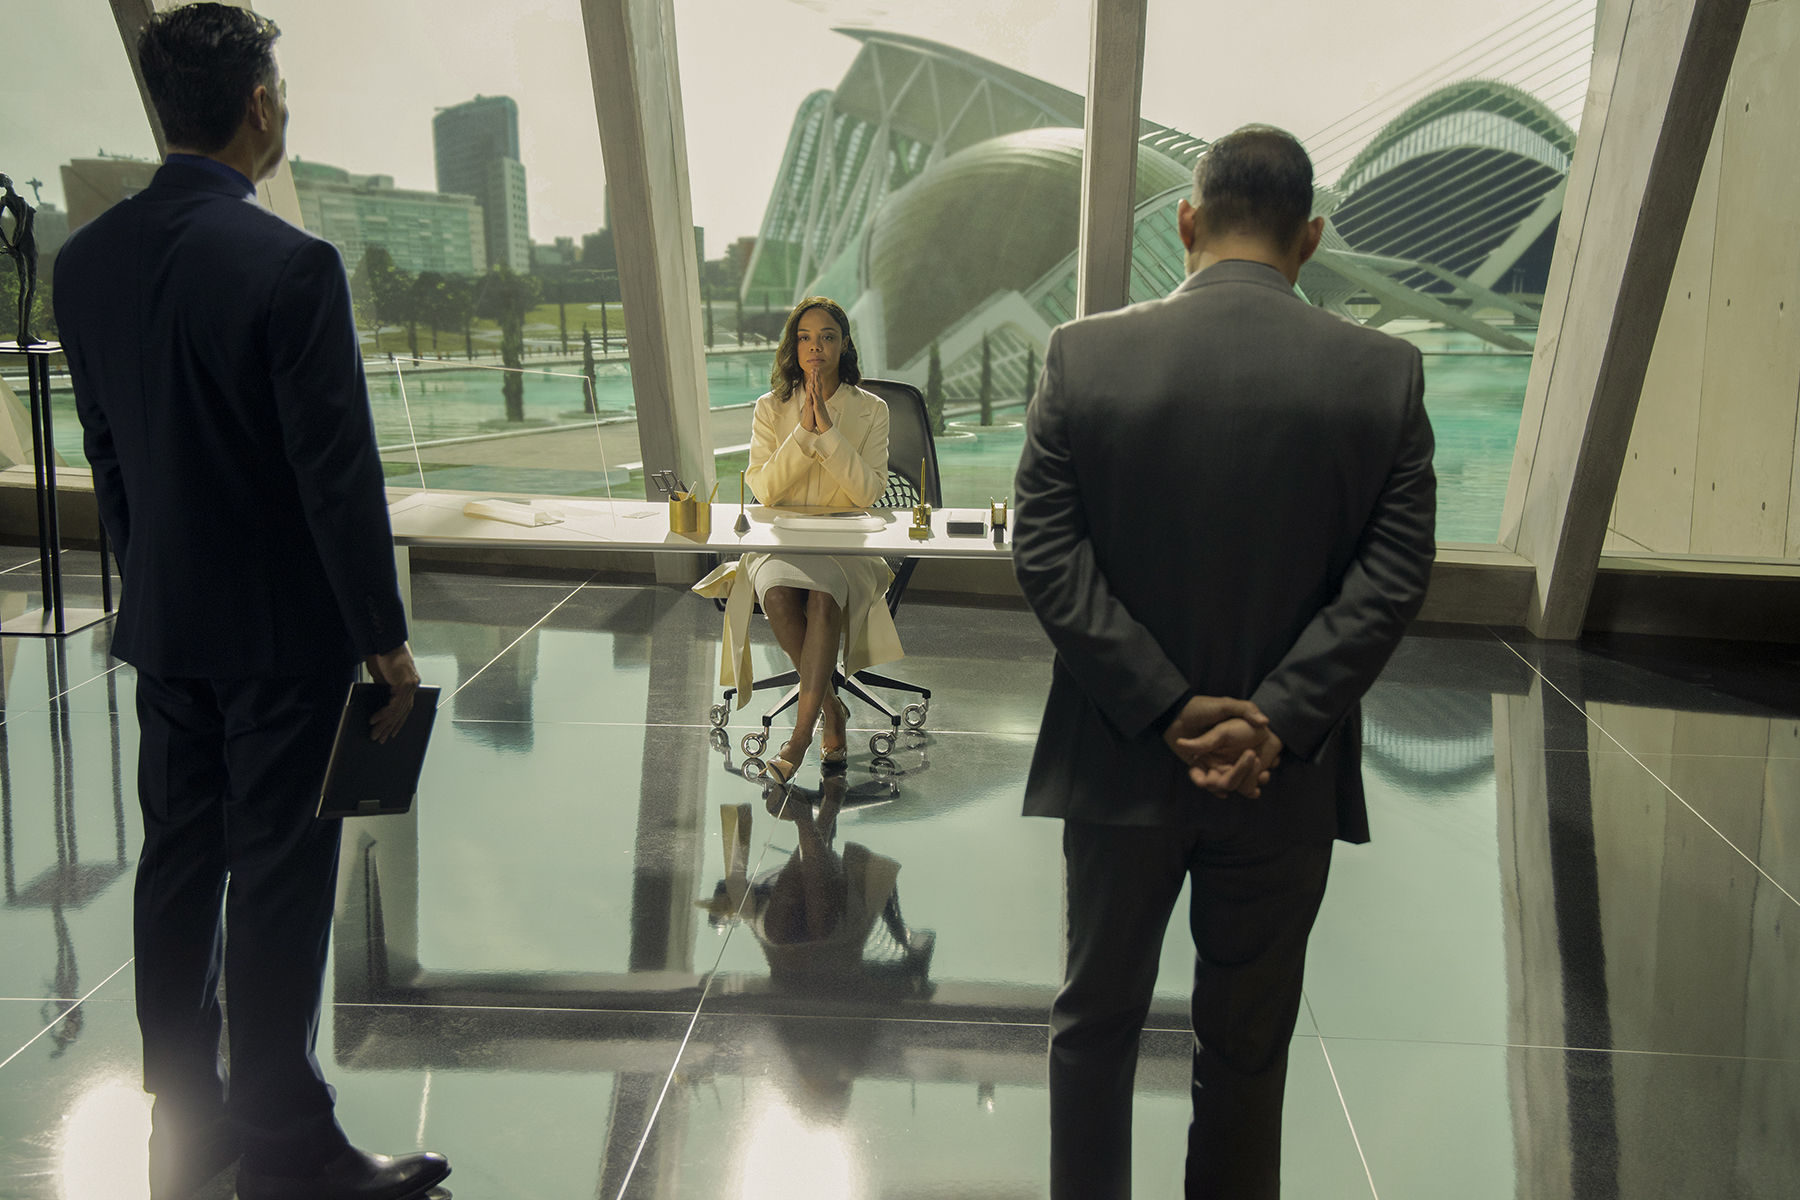 As shown above, the City of Arts and Sciences complex in Valencia, Spain, is used as the fictional headquarters for the corporation that runs the theme park in HBO’s Westworld. (Image courtesy John Johnson/HBO)